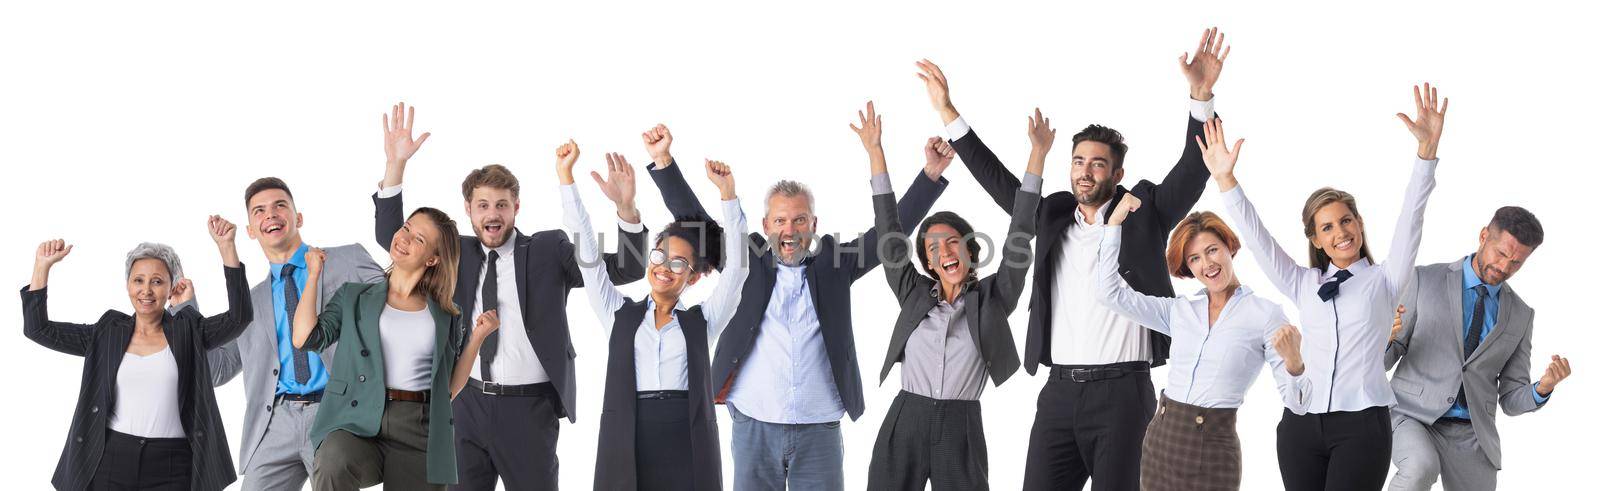 Business People Raising Arms by ALotOfPeople